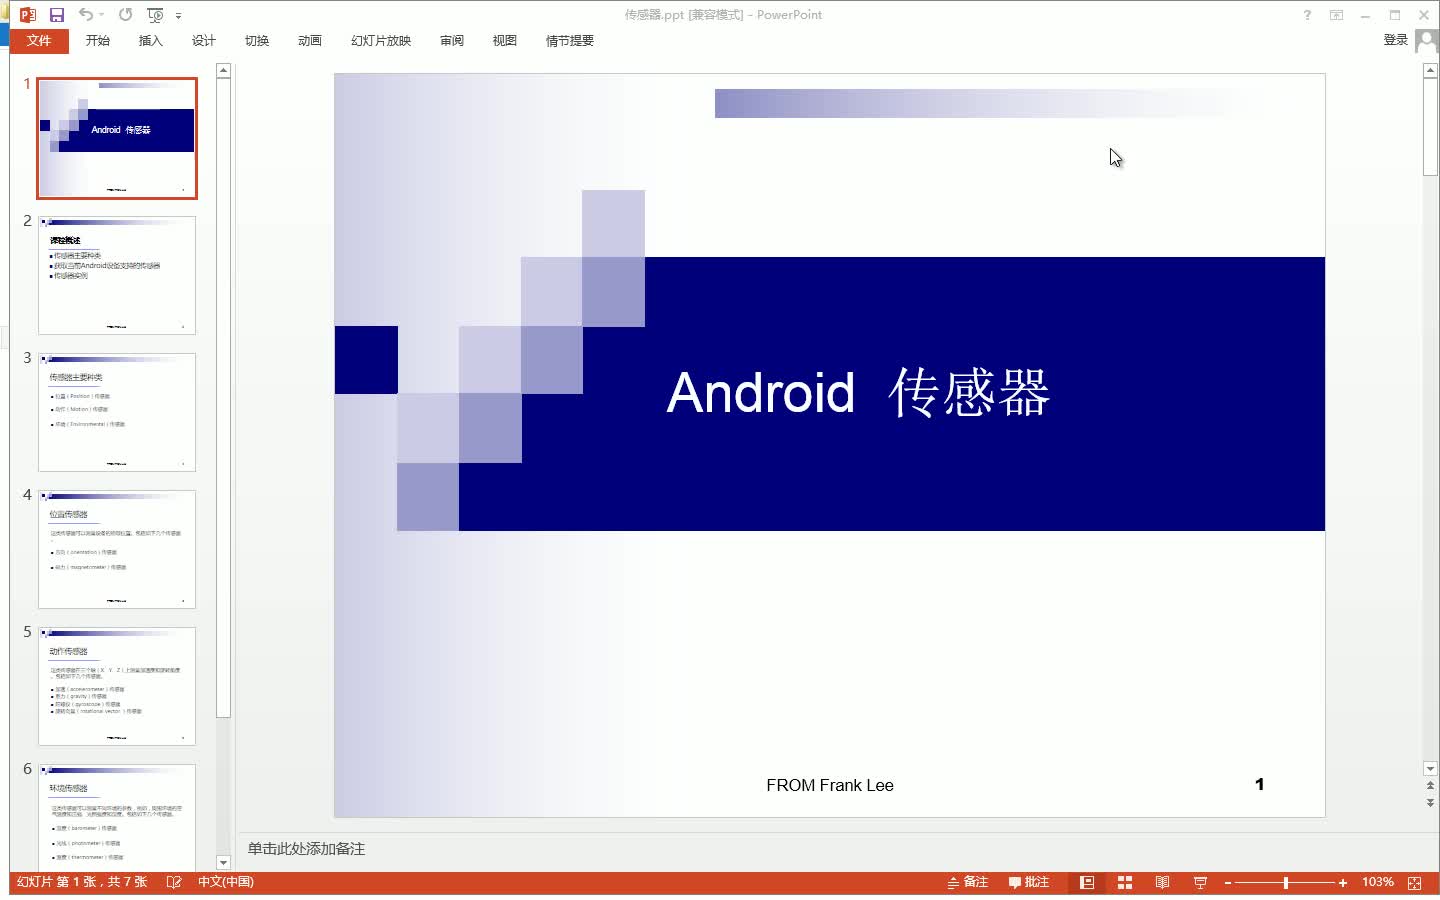 Android 传感器开发